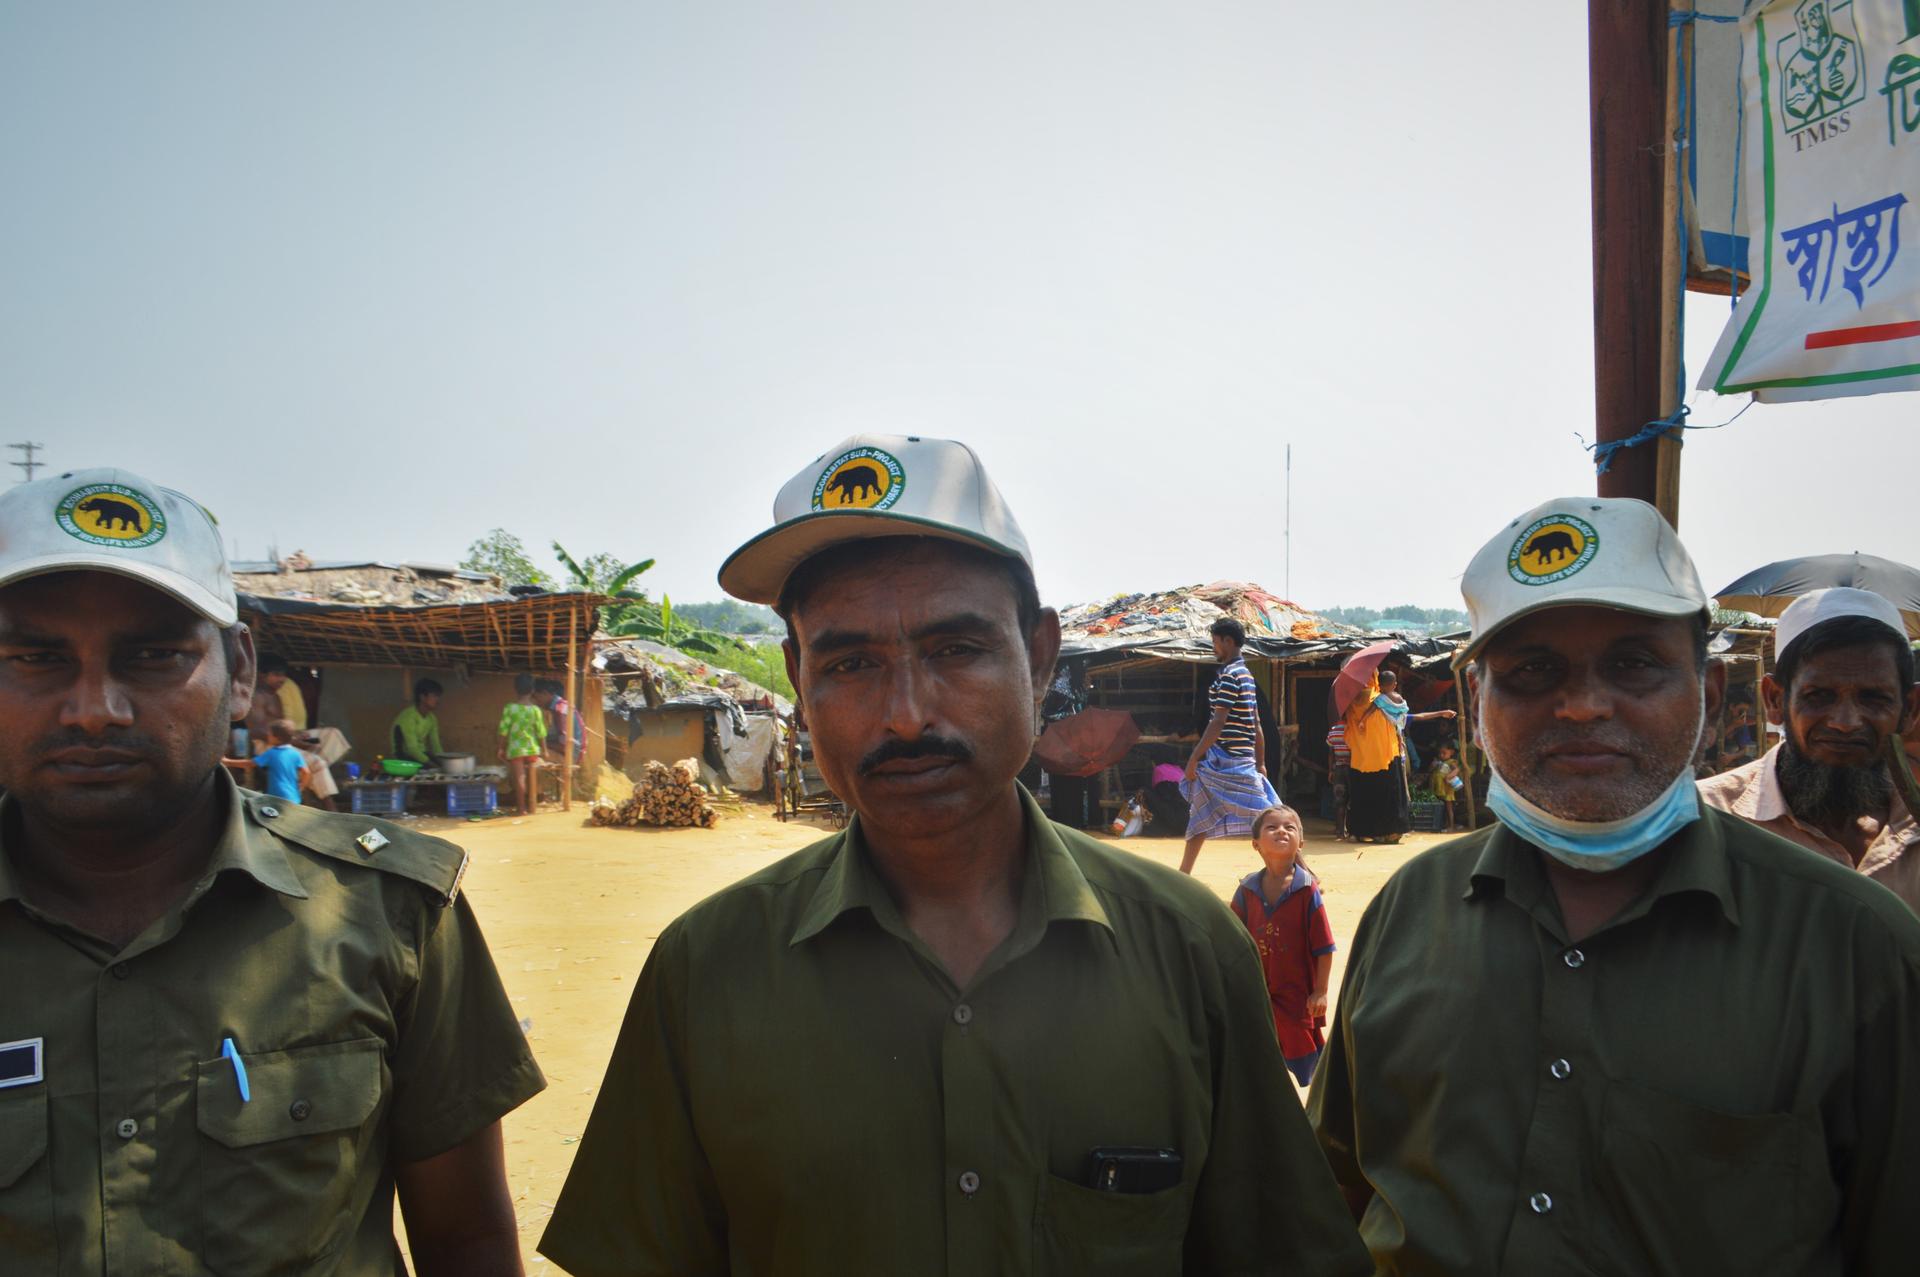 Forestry officials patrol the Kutupalong refugee camp in Bangladesh. The expanding camp has put elephants and refugees into closer contact. “The animals have no space now,” one official said.